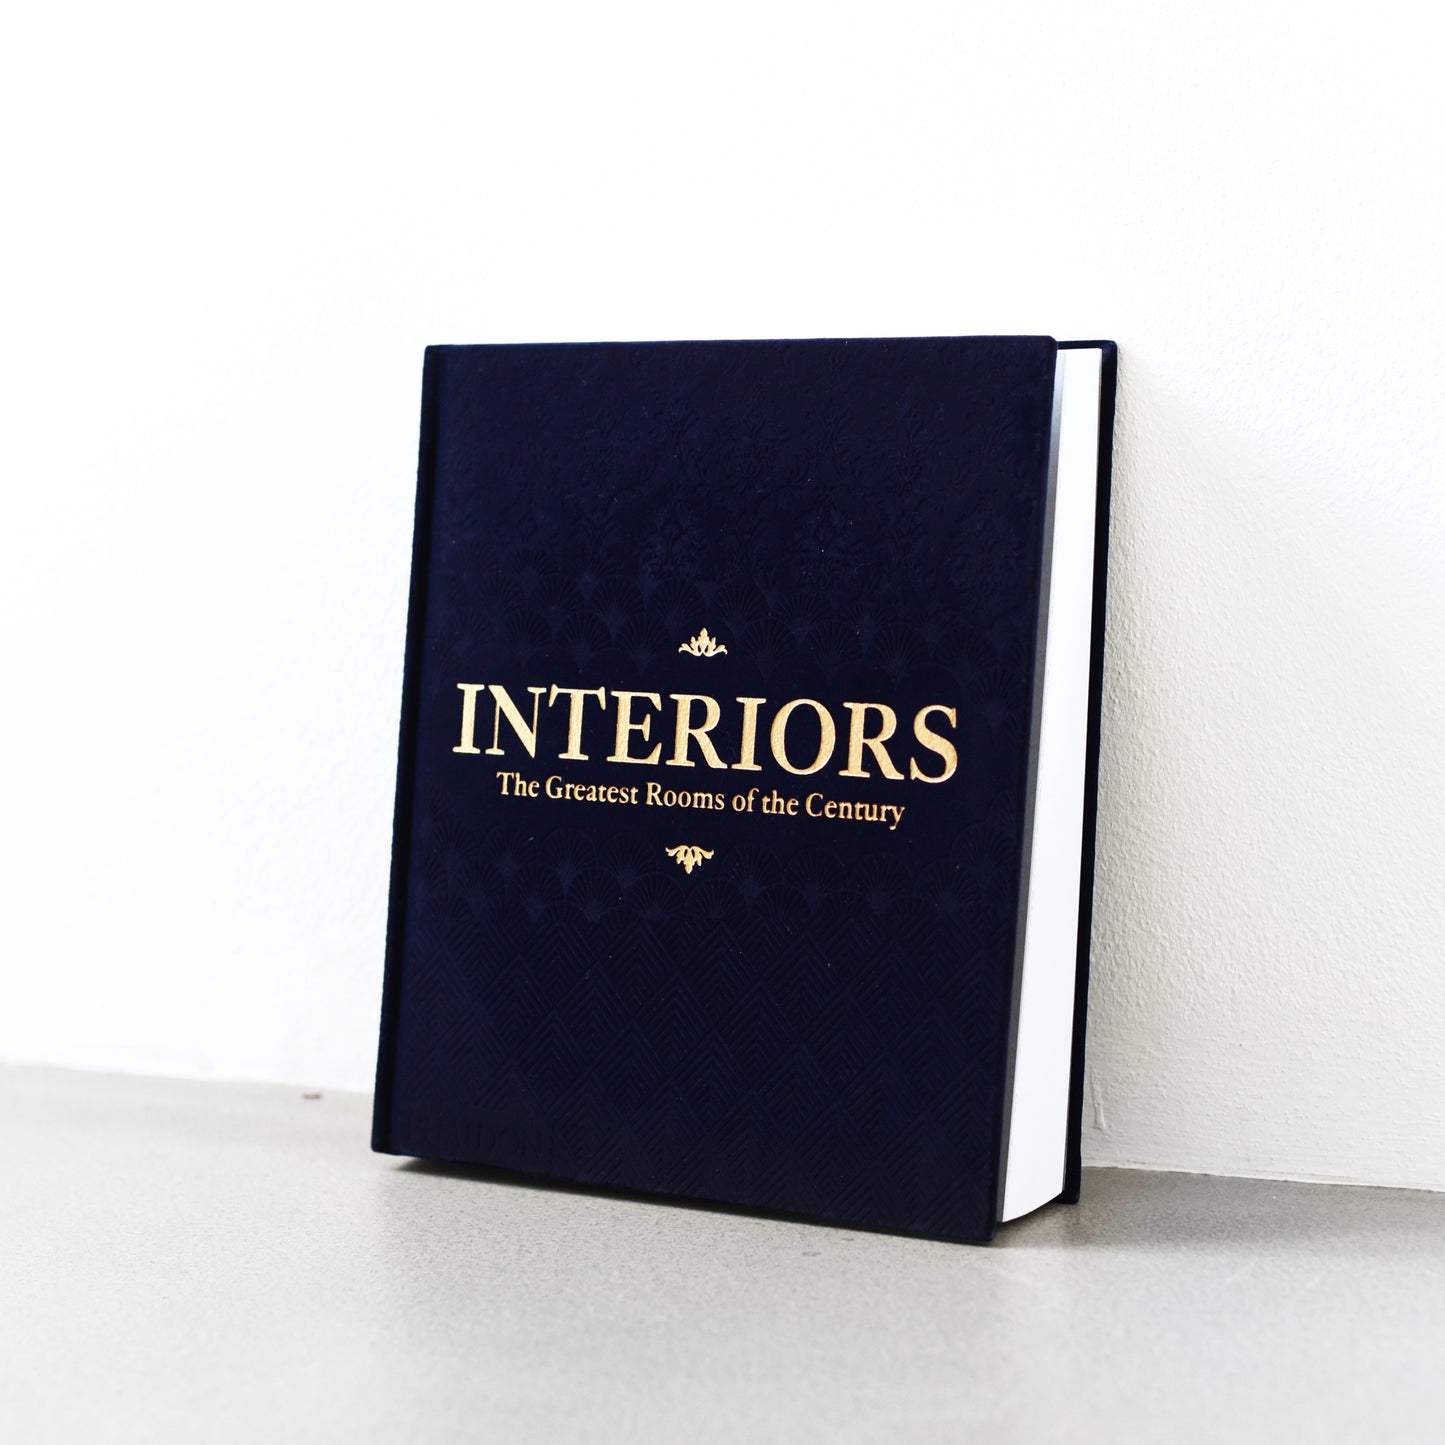 INTERIORS: The Greatest Rooms of the Century (Midnight Blue Edition)